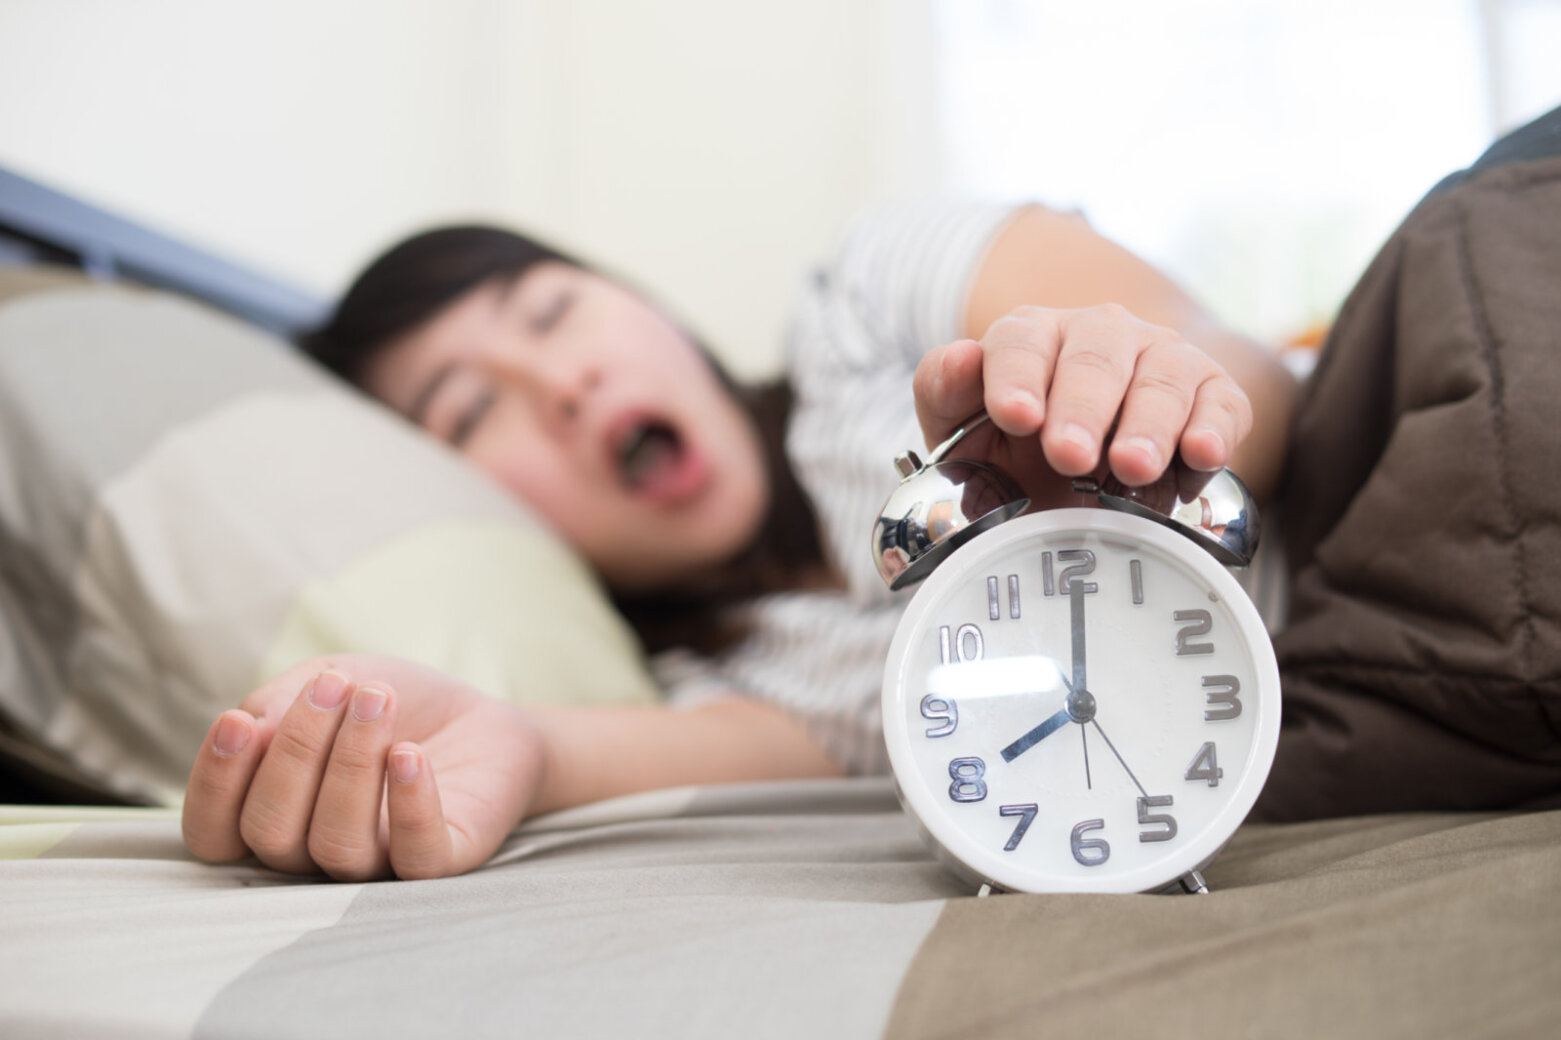 When it comes to sleep, where does your county rank?